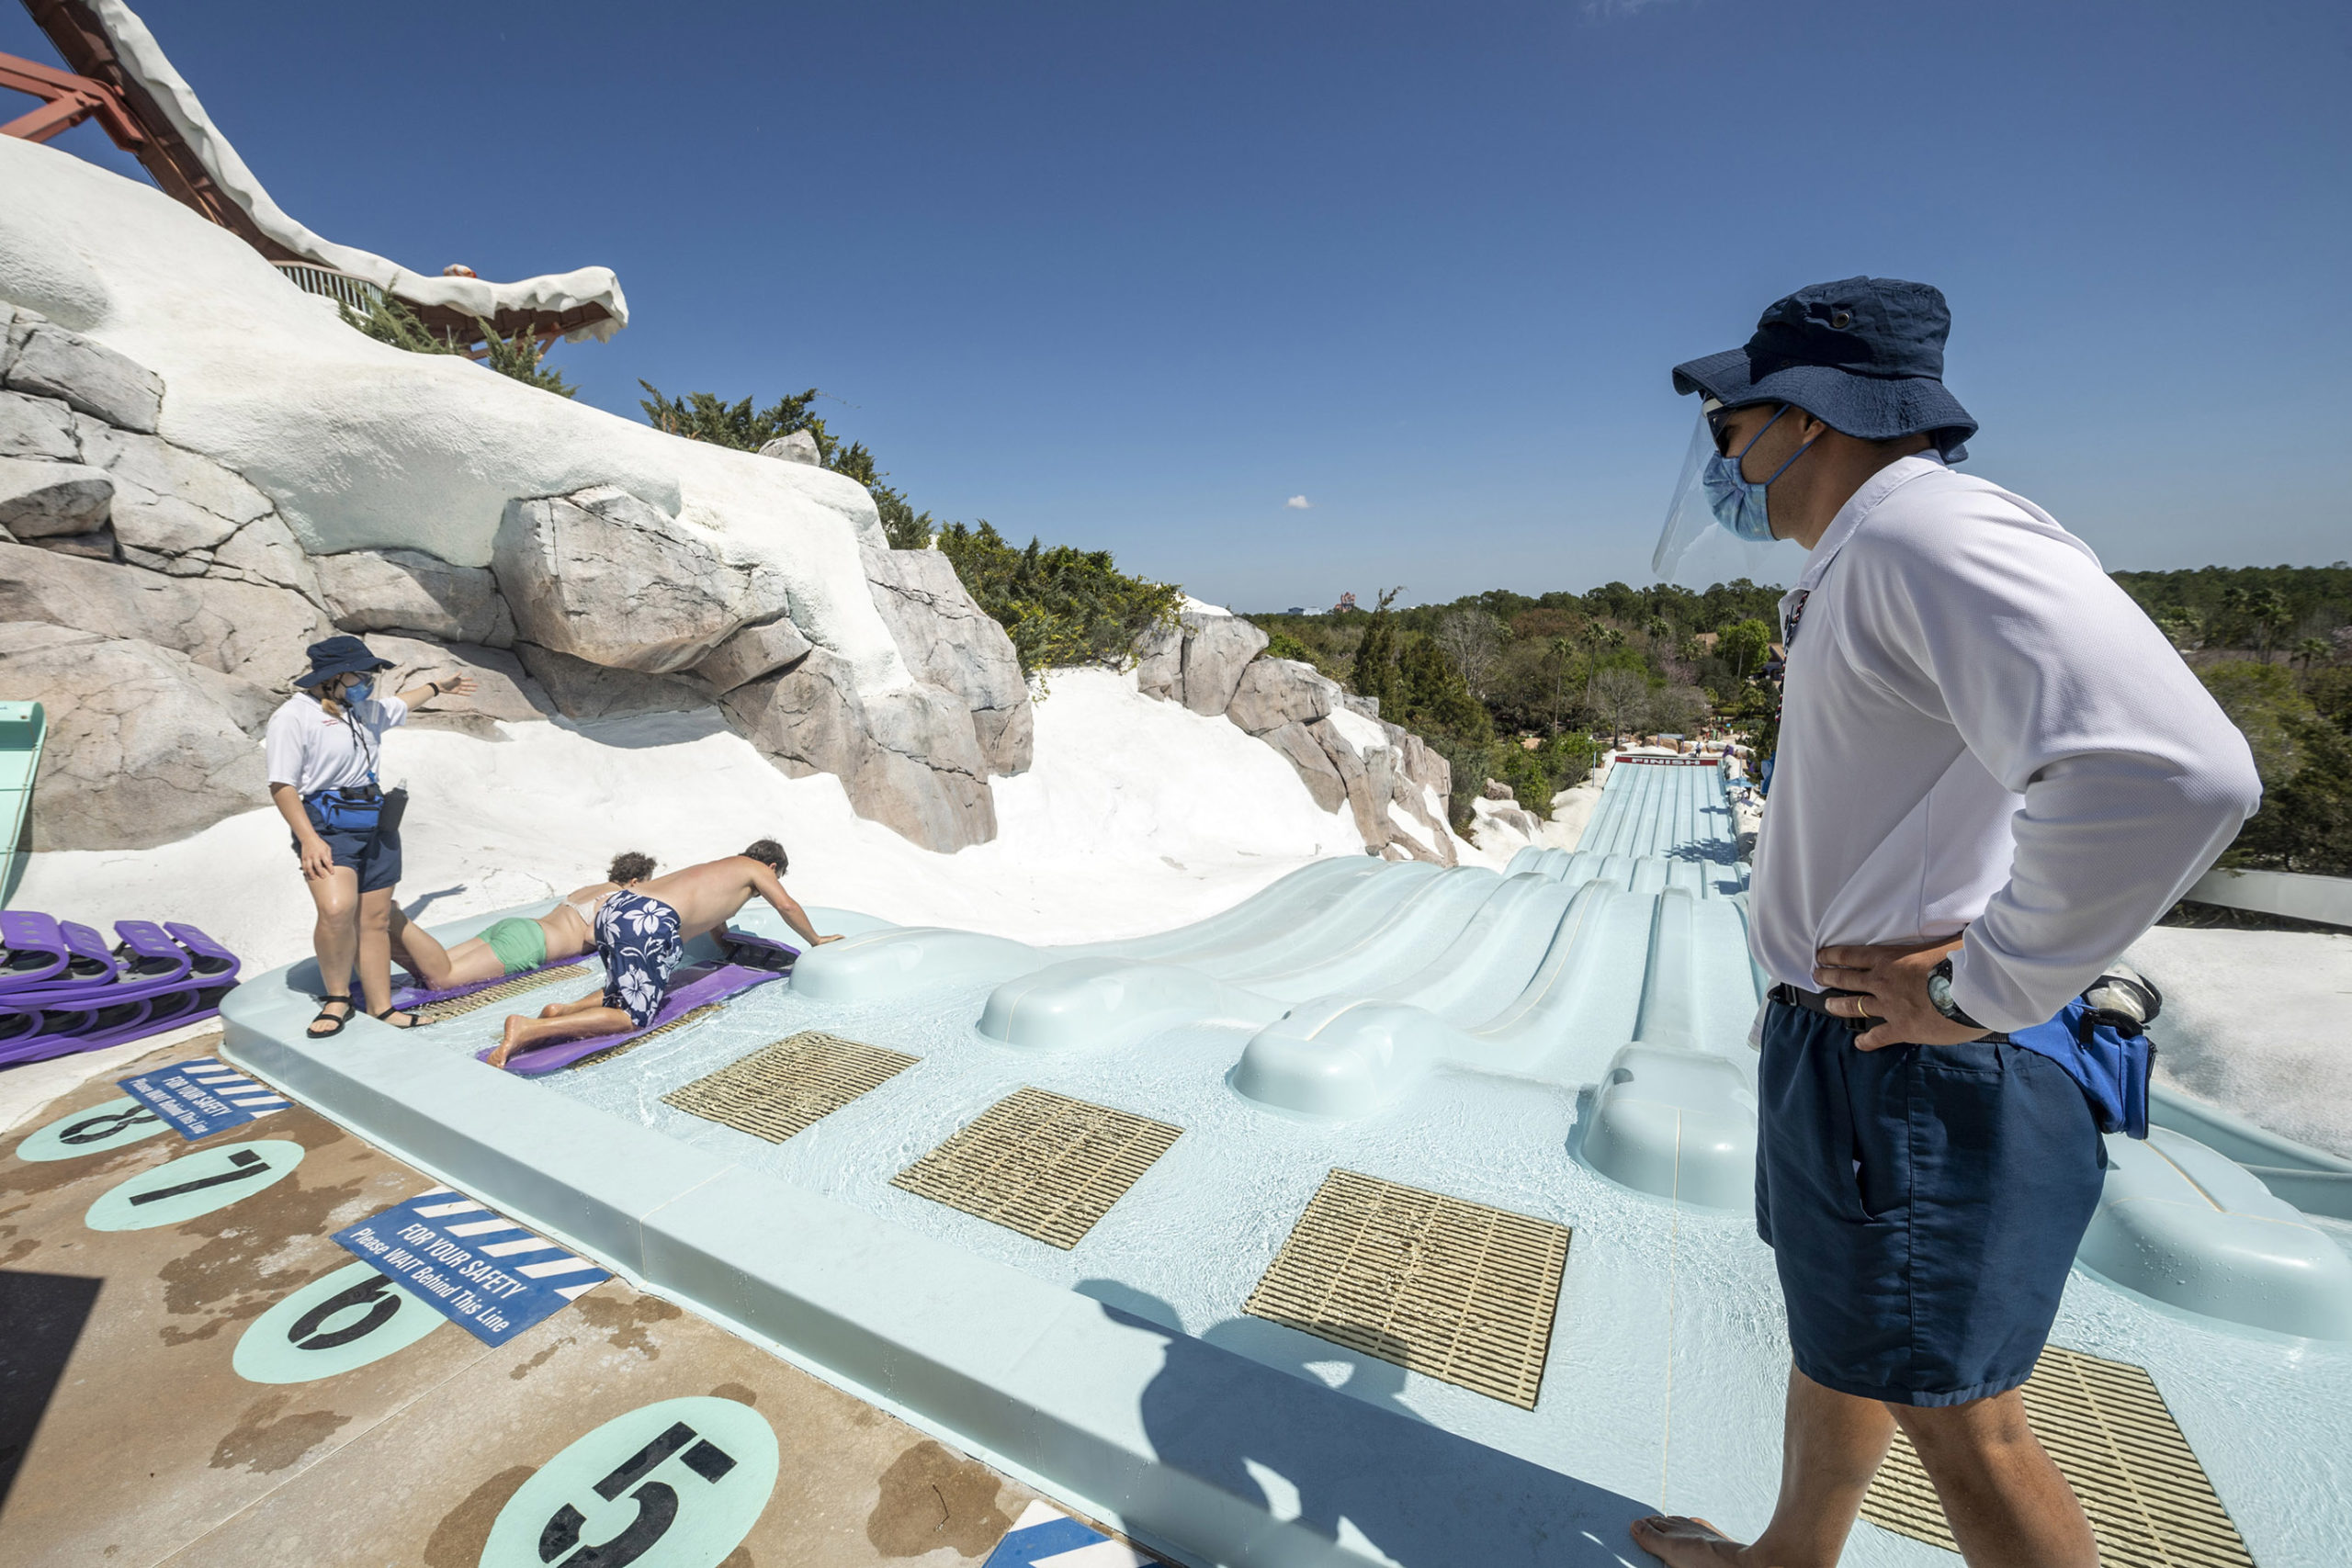 Blizzard Beach reopening from COVID shutdown Photo 2 of 3